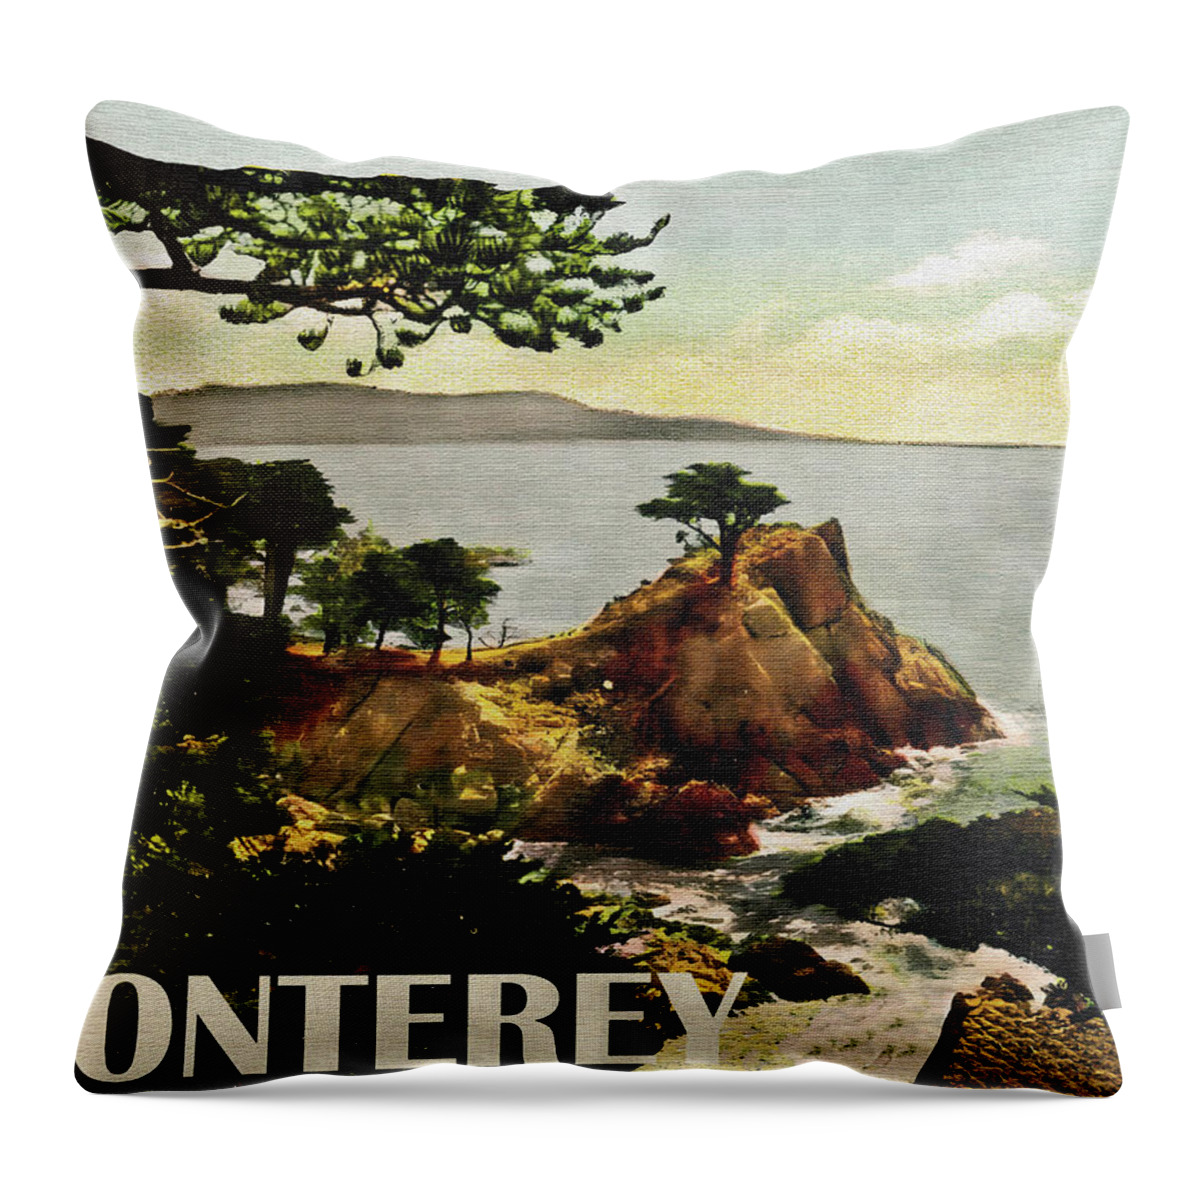 Monterey Throw Pillow featuring the photograph Monterey Photo by Long Shot